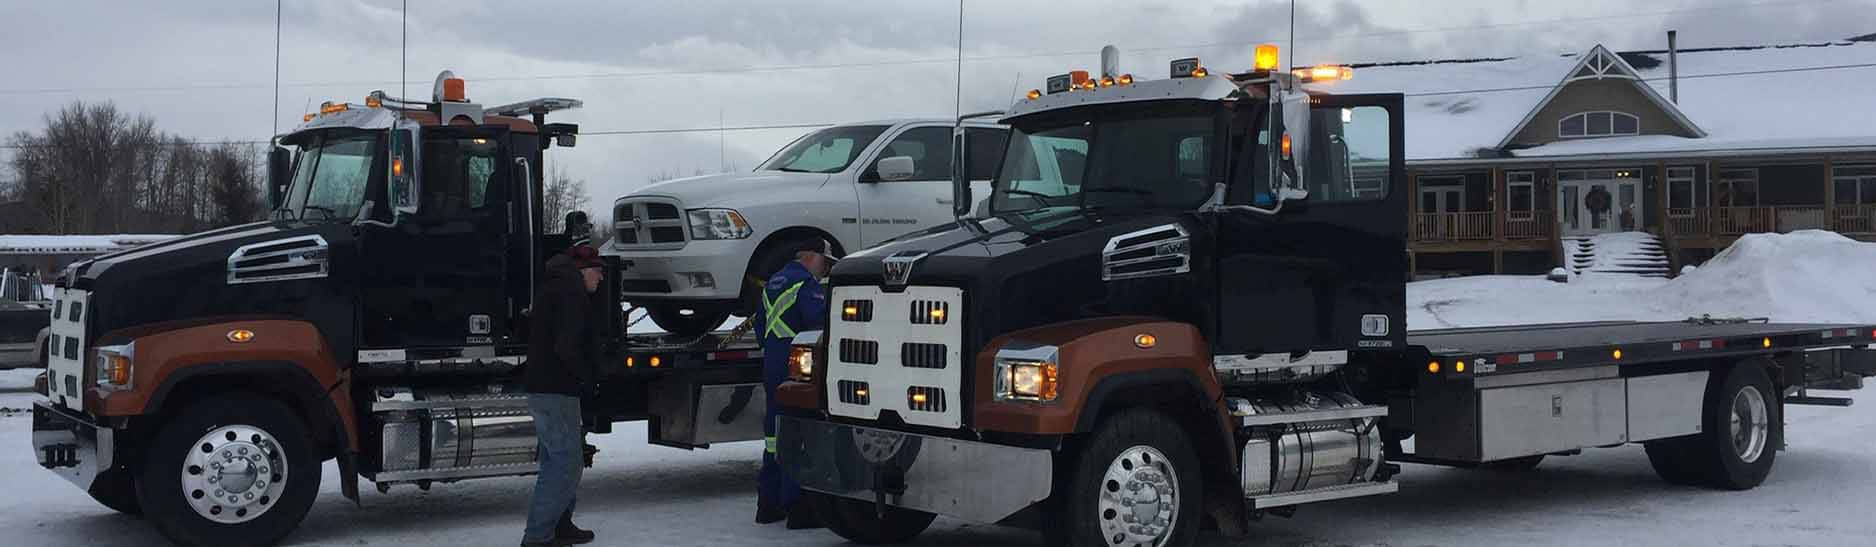 Chetwynd Towing Service, Tow Truck Service and Towing Company